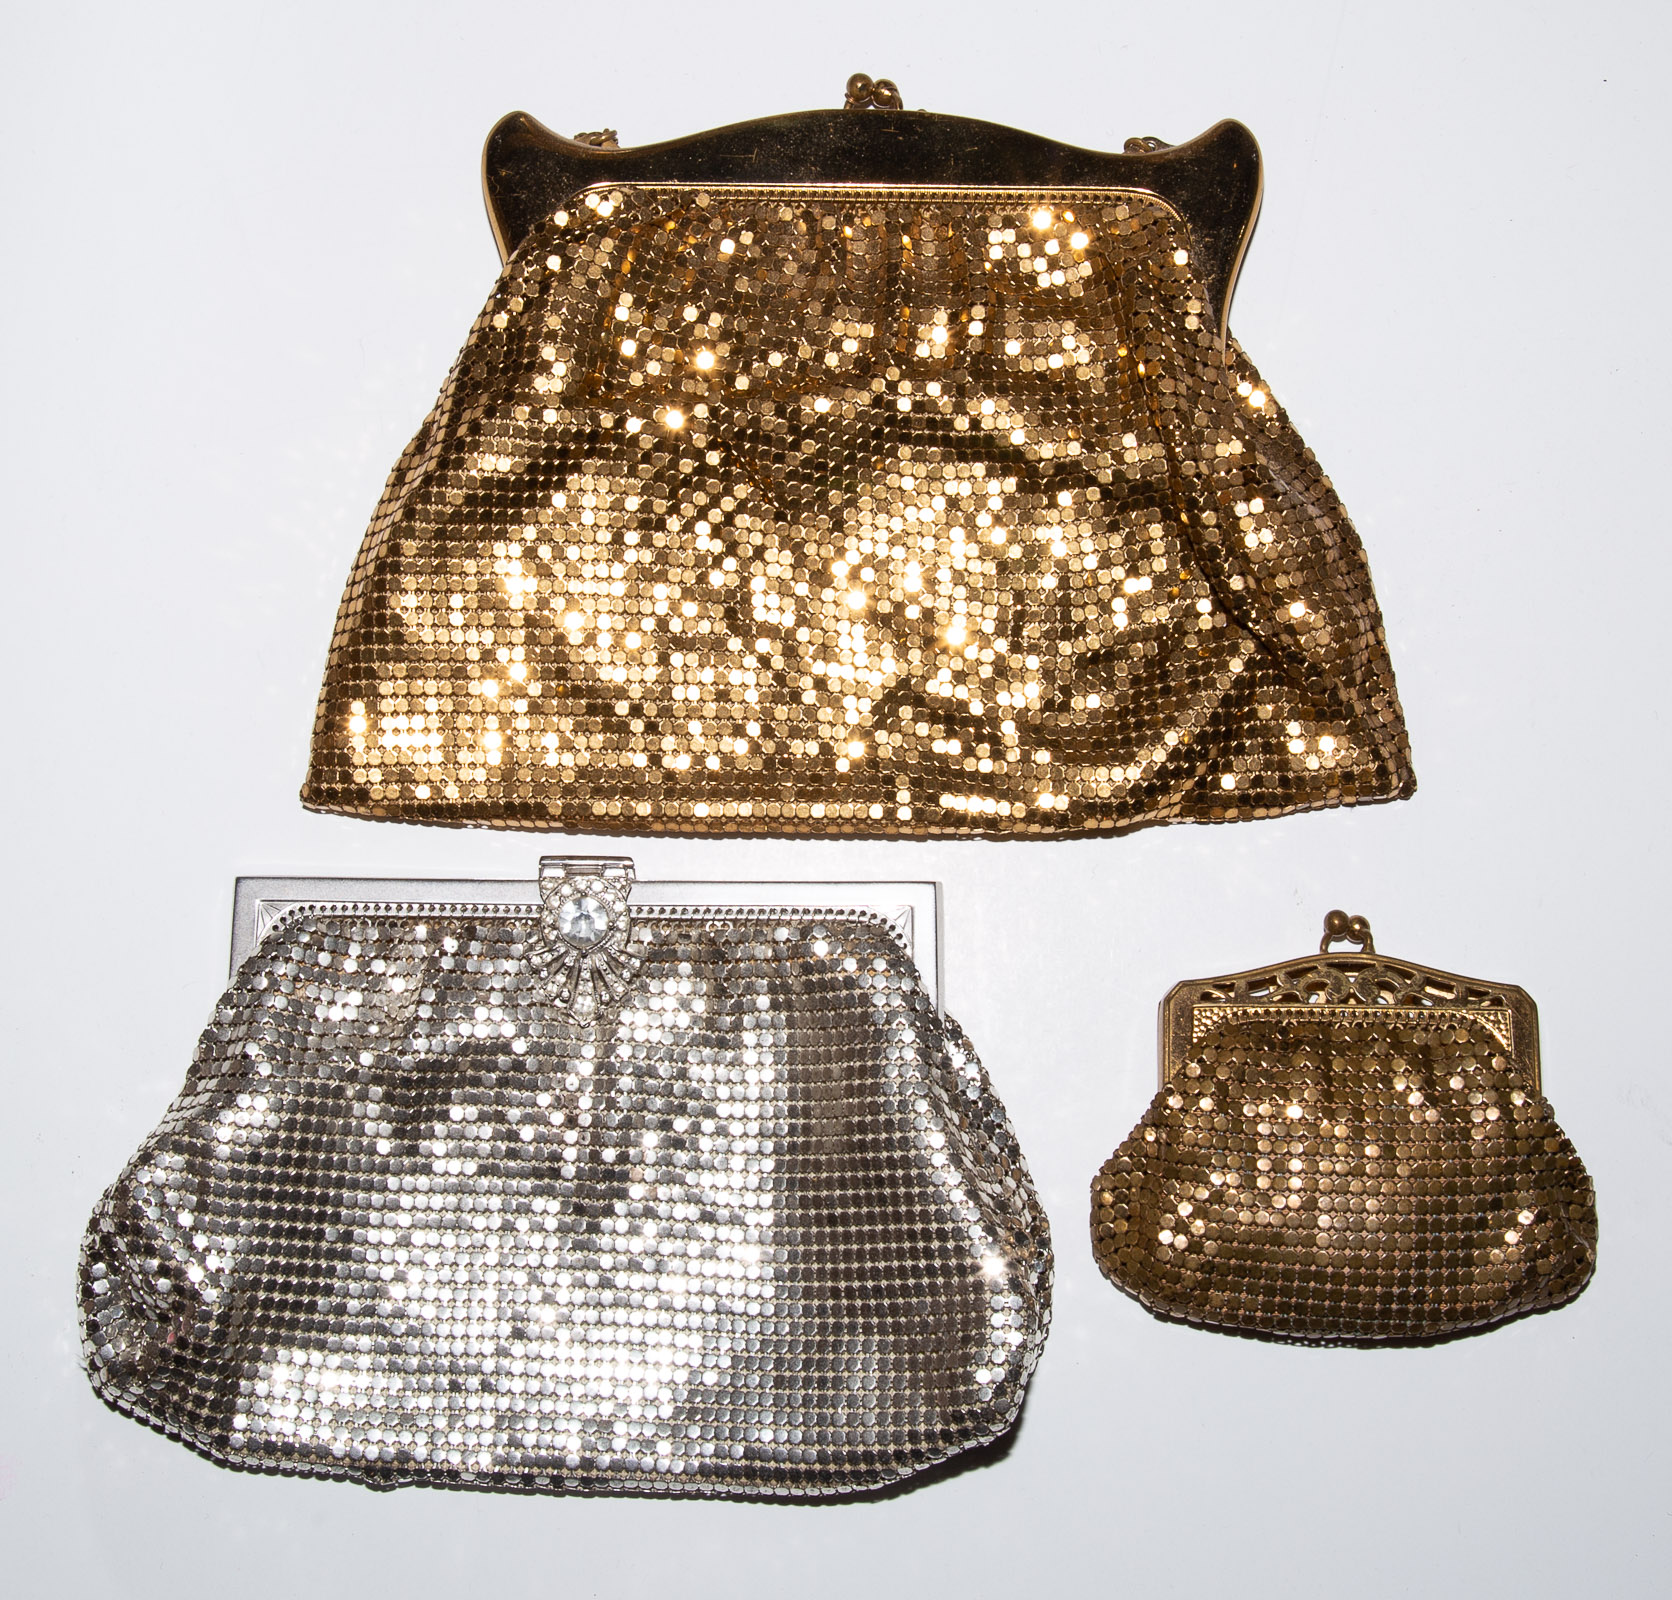 TWO WHITING & DAVIS MESH EVENING BAGS